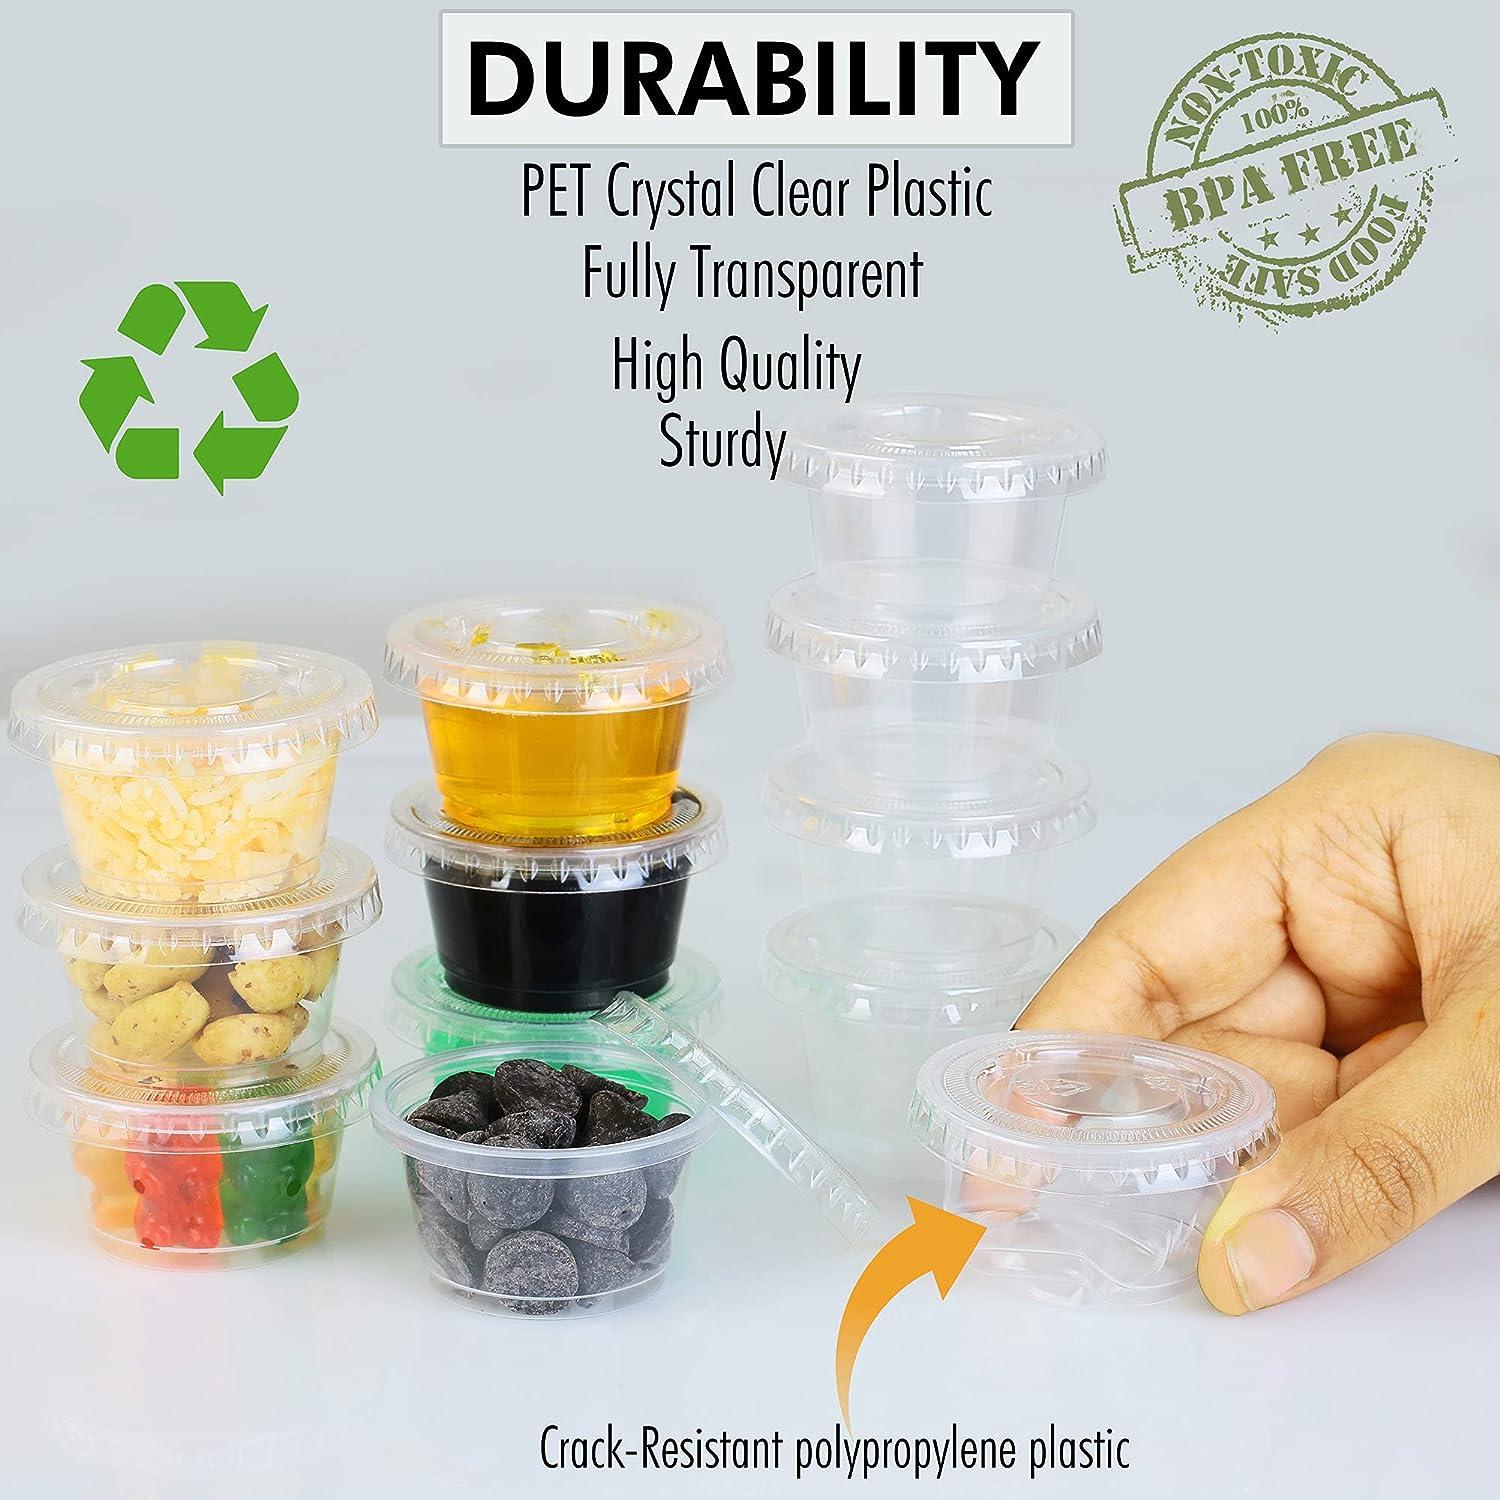 Small Plastic Cups With Lids - 25 Pack 